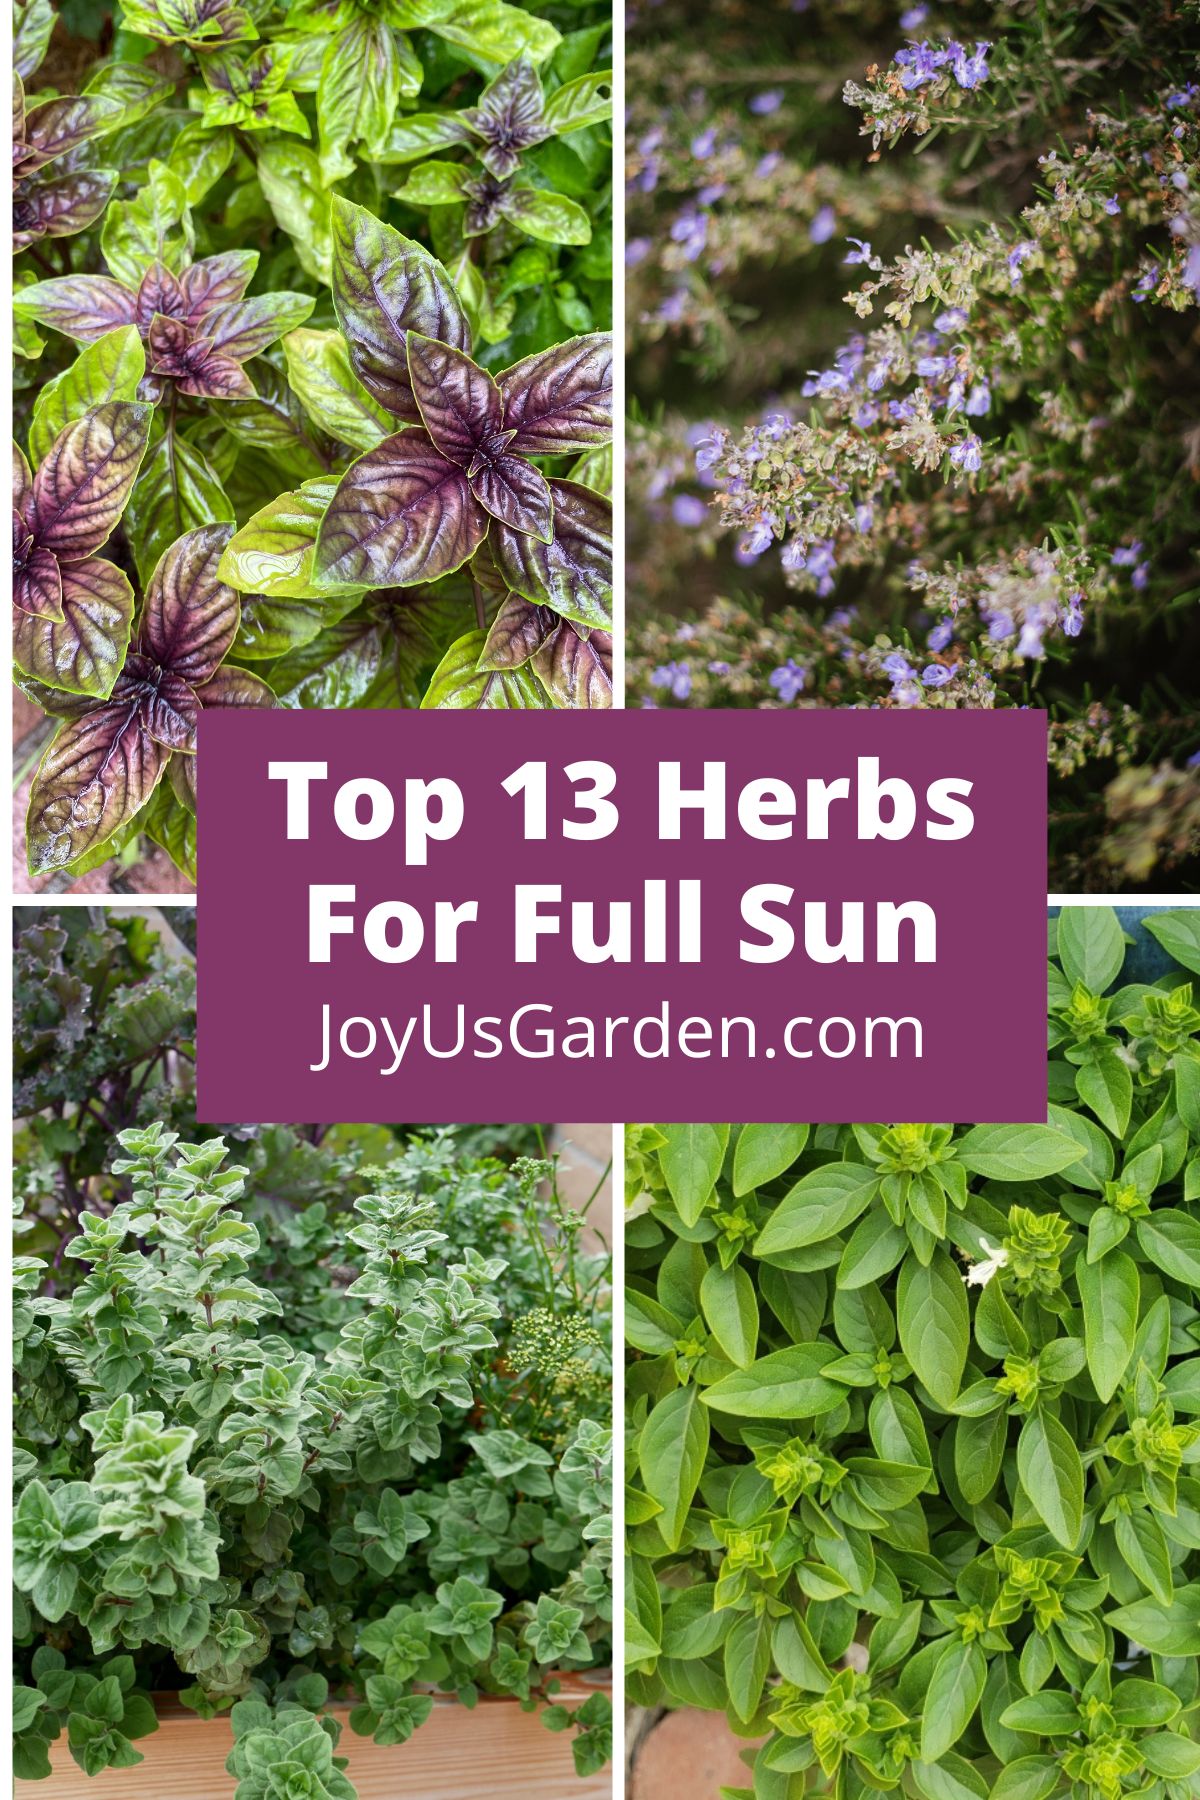 a collage of 4 different herb plants the text reads top 13 herbs for full sun joyusgarden.com